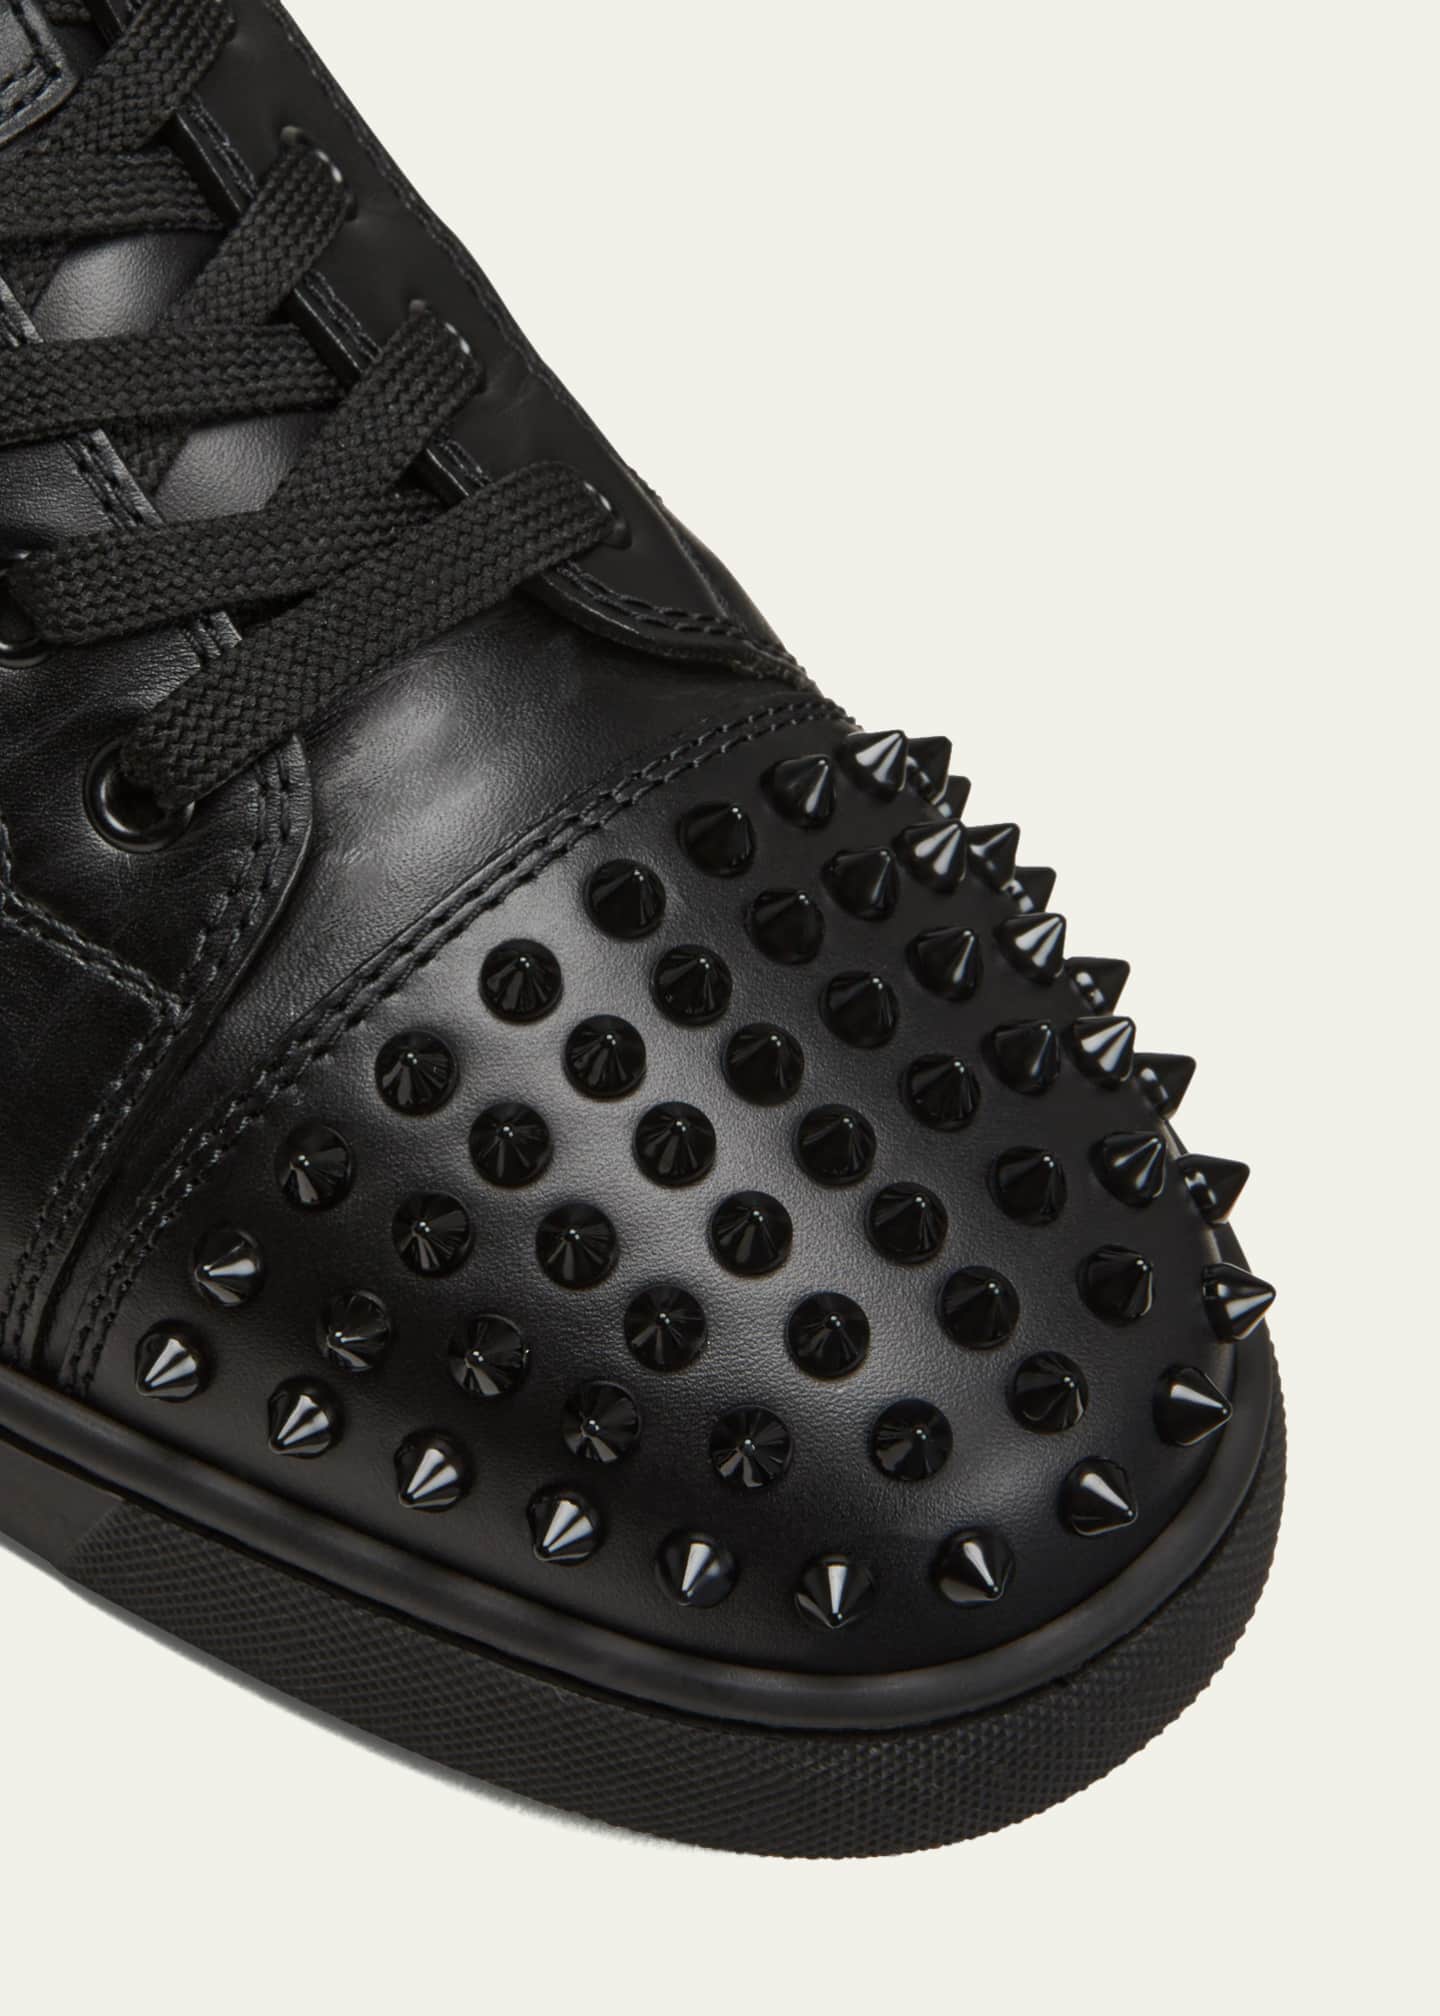 Christian Louboutin Black Leather Louis Junior Spikes Sneakers